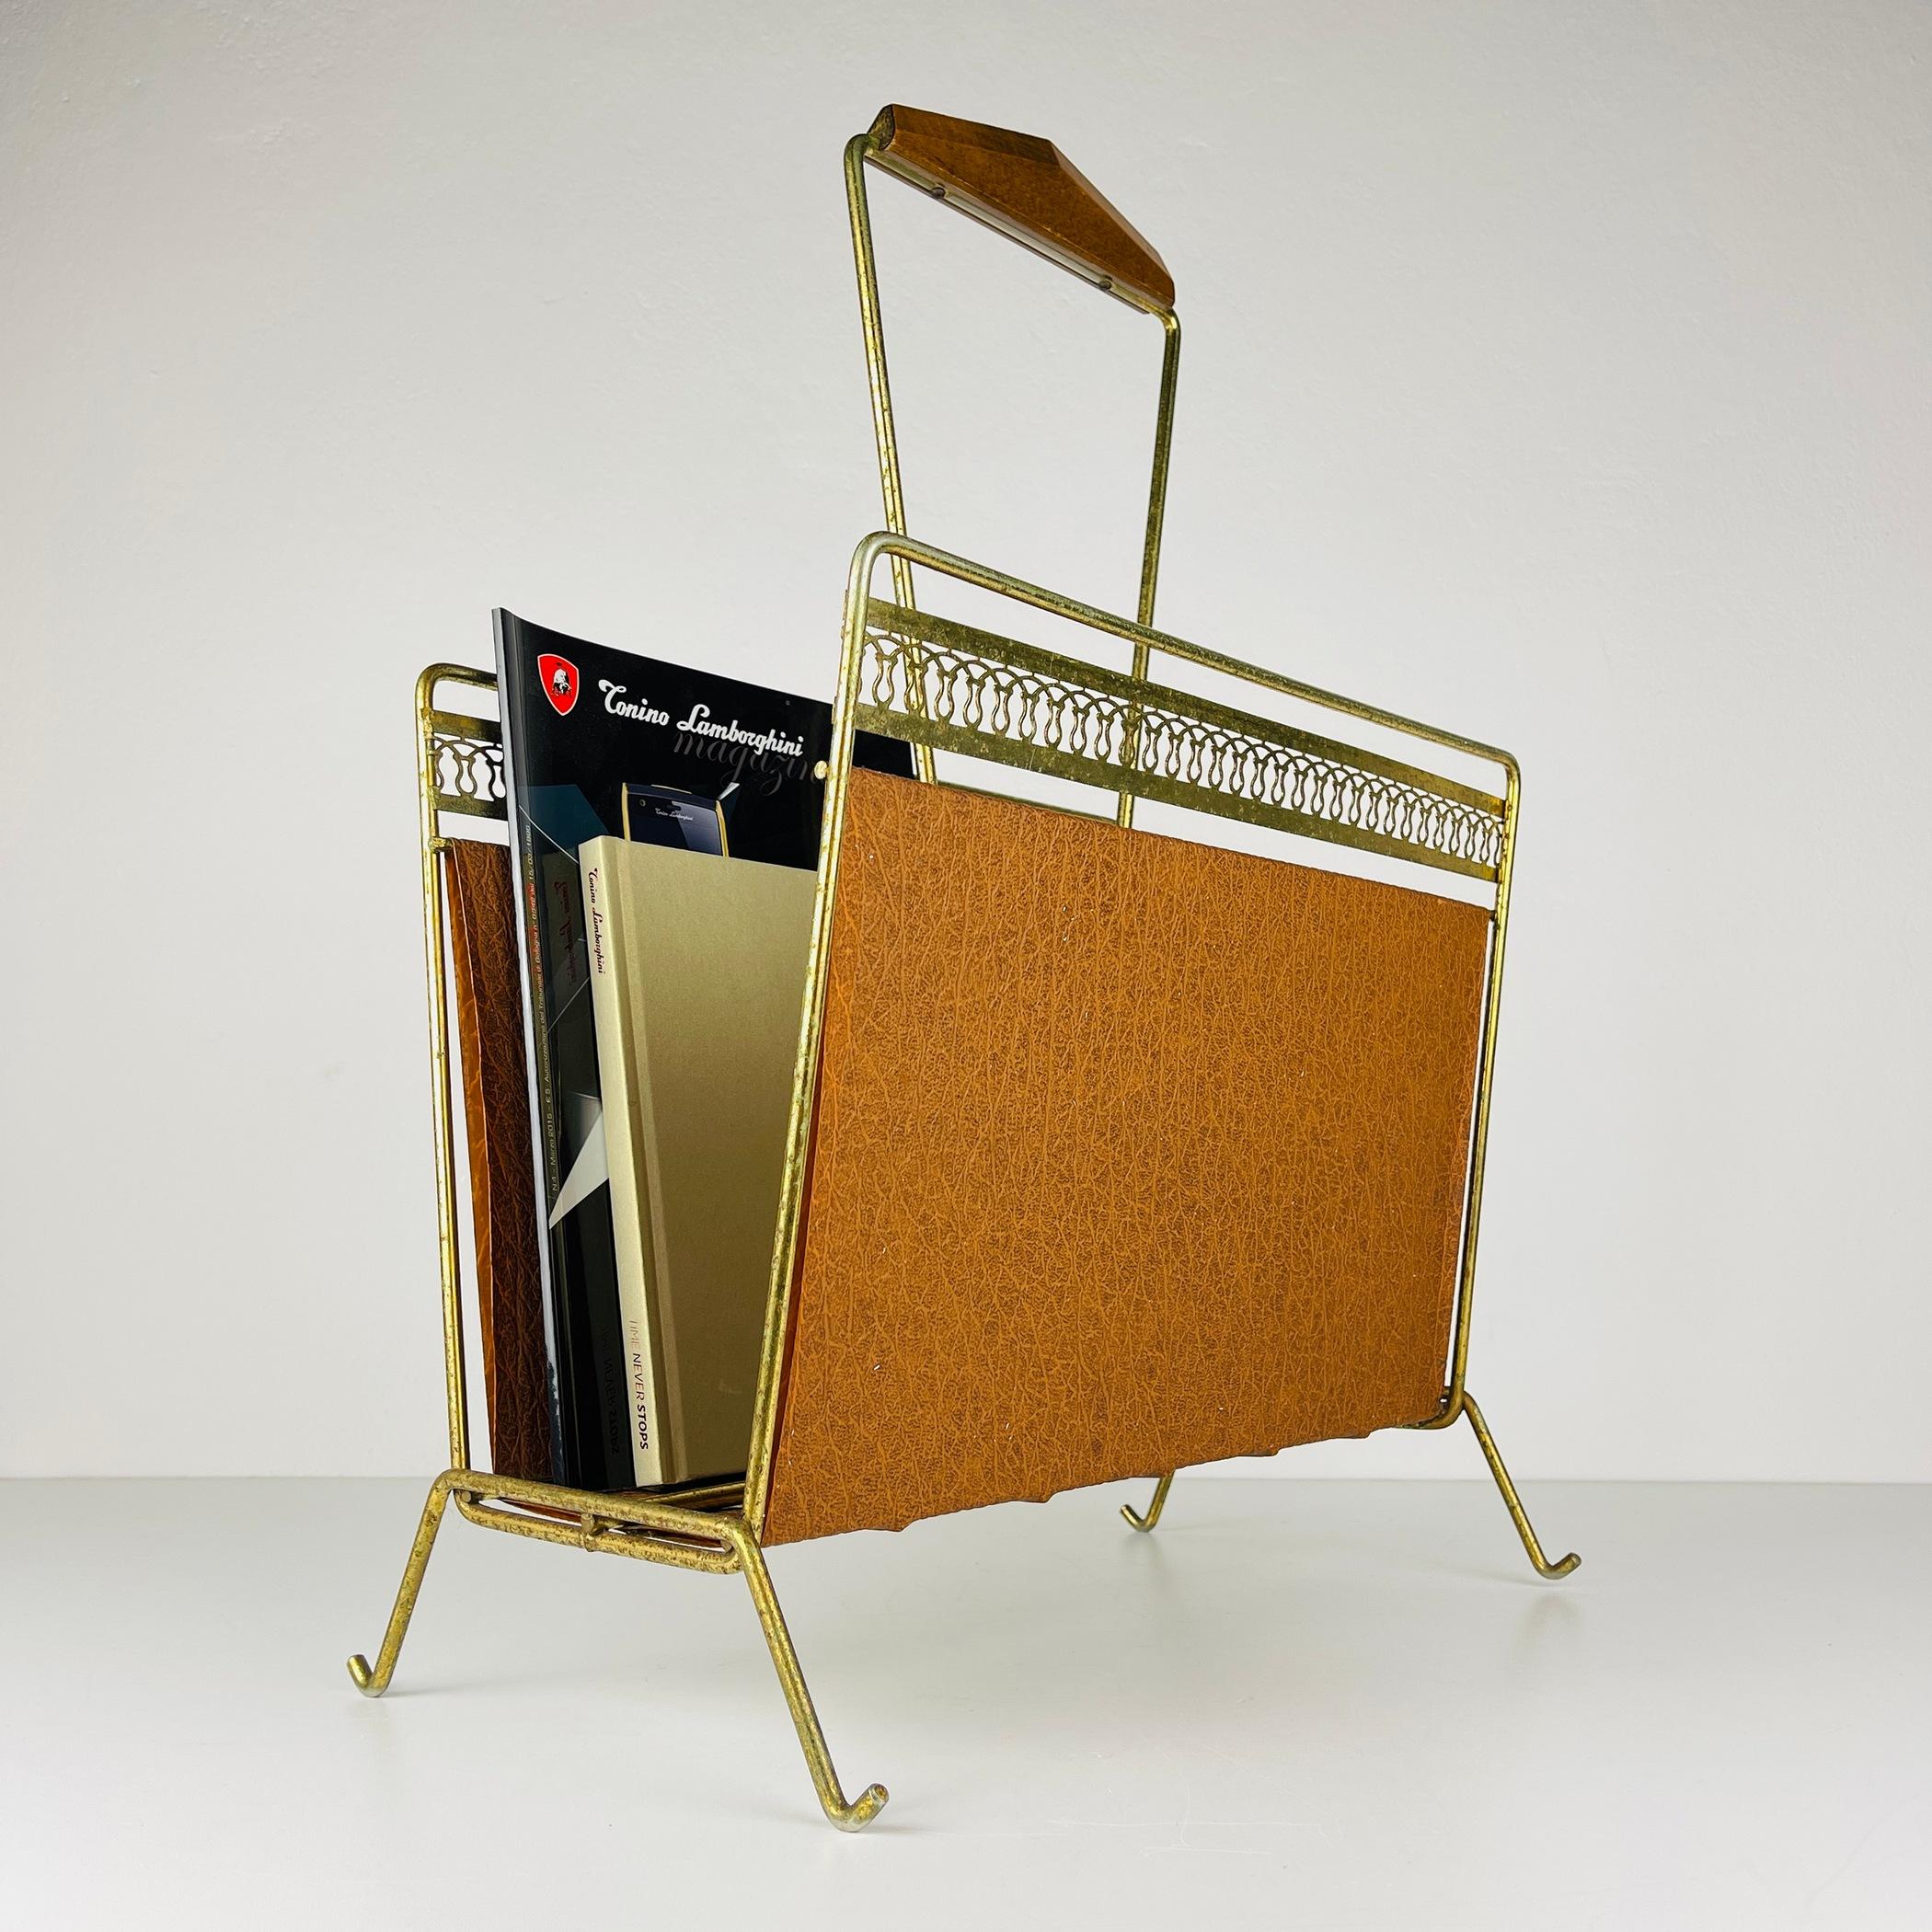 A midcentury magazine rack for magazines and newspapers. Made of brass and leatherette in Italy in the 1960s. All parts are original. Wonderful natural patina. A charming piece from the middle of the last century will certainly decorate your